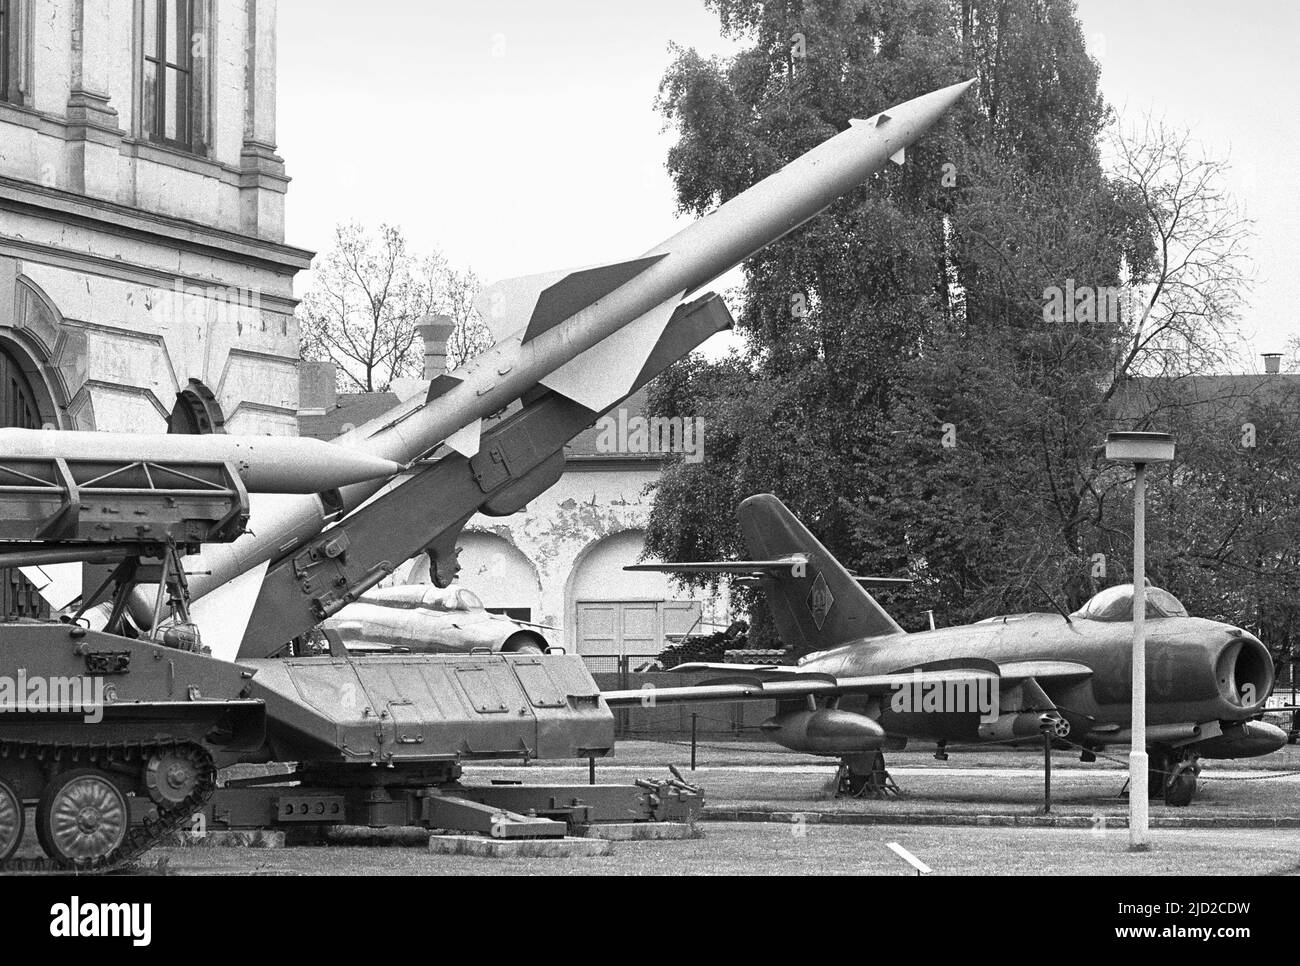 - Germania, Lipsia, museo delle Forze Armate subito dopo la riunificazione fra DDR e Repubblica Federale Tedesca (Marzo 1991)   - Germany, Leipzig, museum of the Armed Forces immediately after the reunification between DDR and the Federal Republic of Germany March 1991) Stock Photo